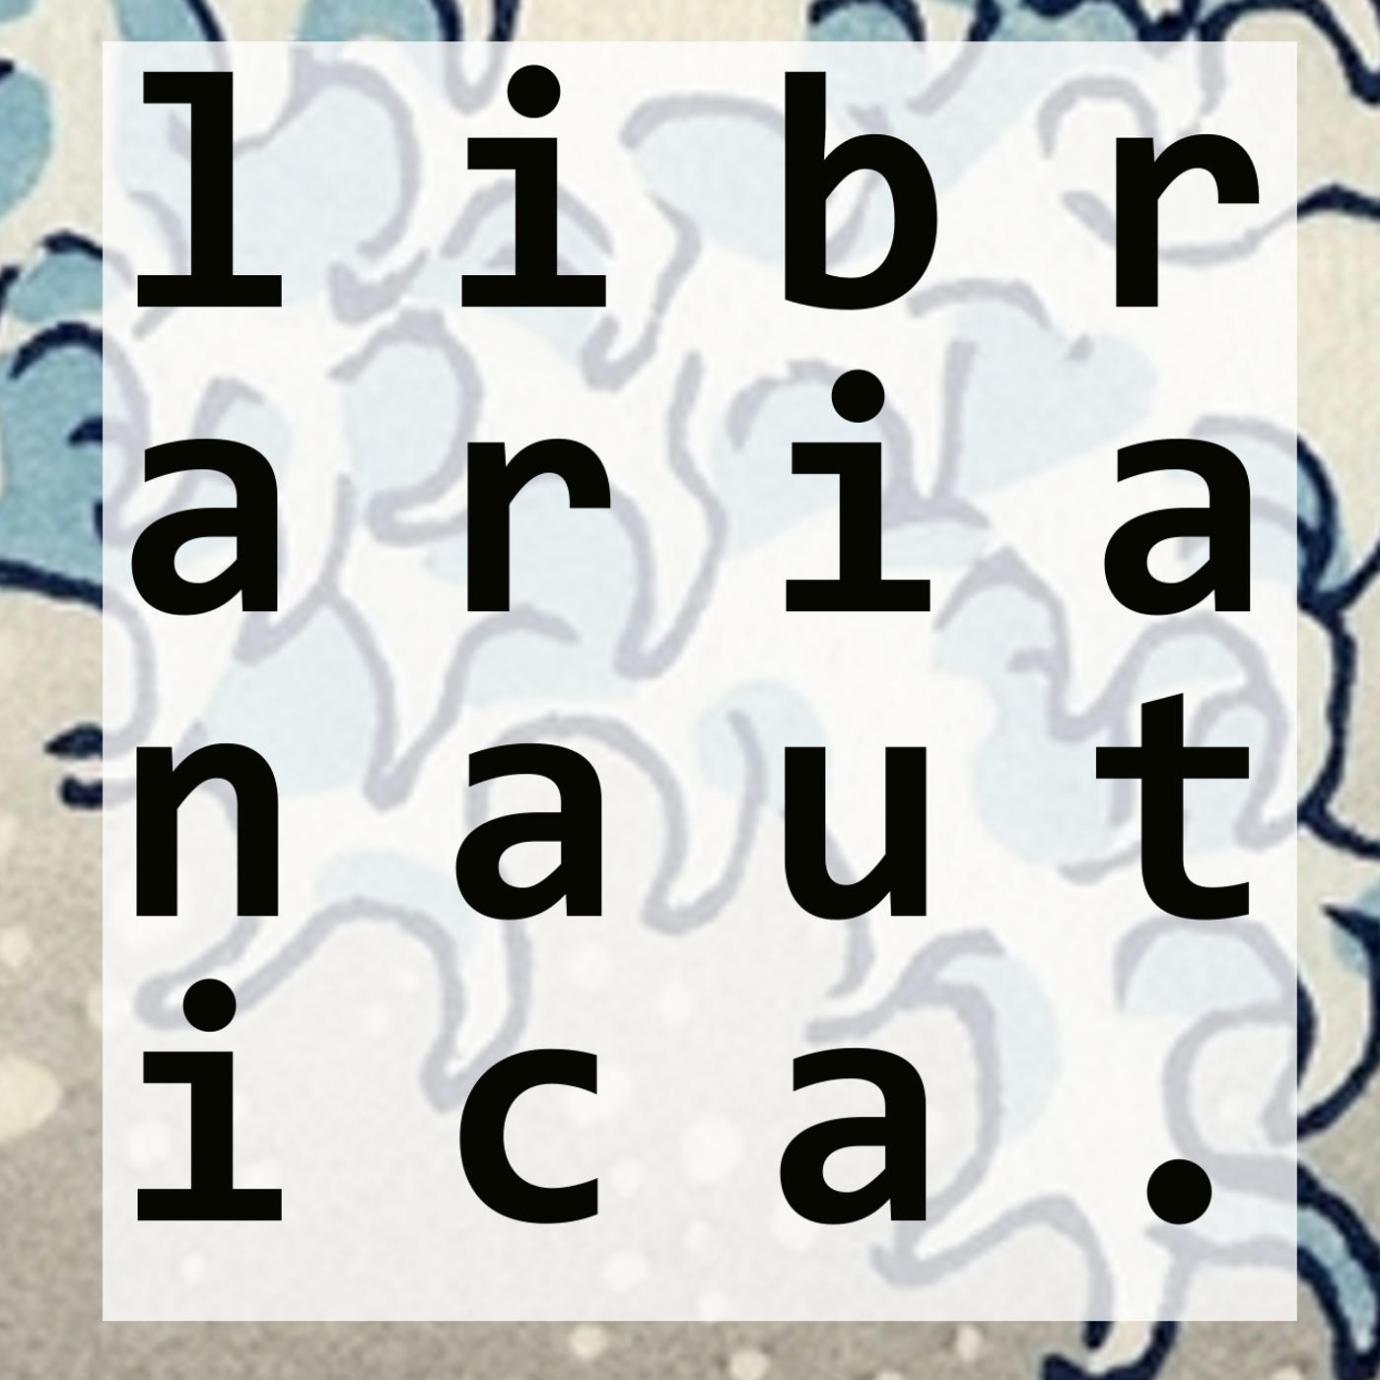 text "Librarianautica" split over 4 lines over a Hokusai print of waves